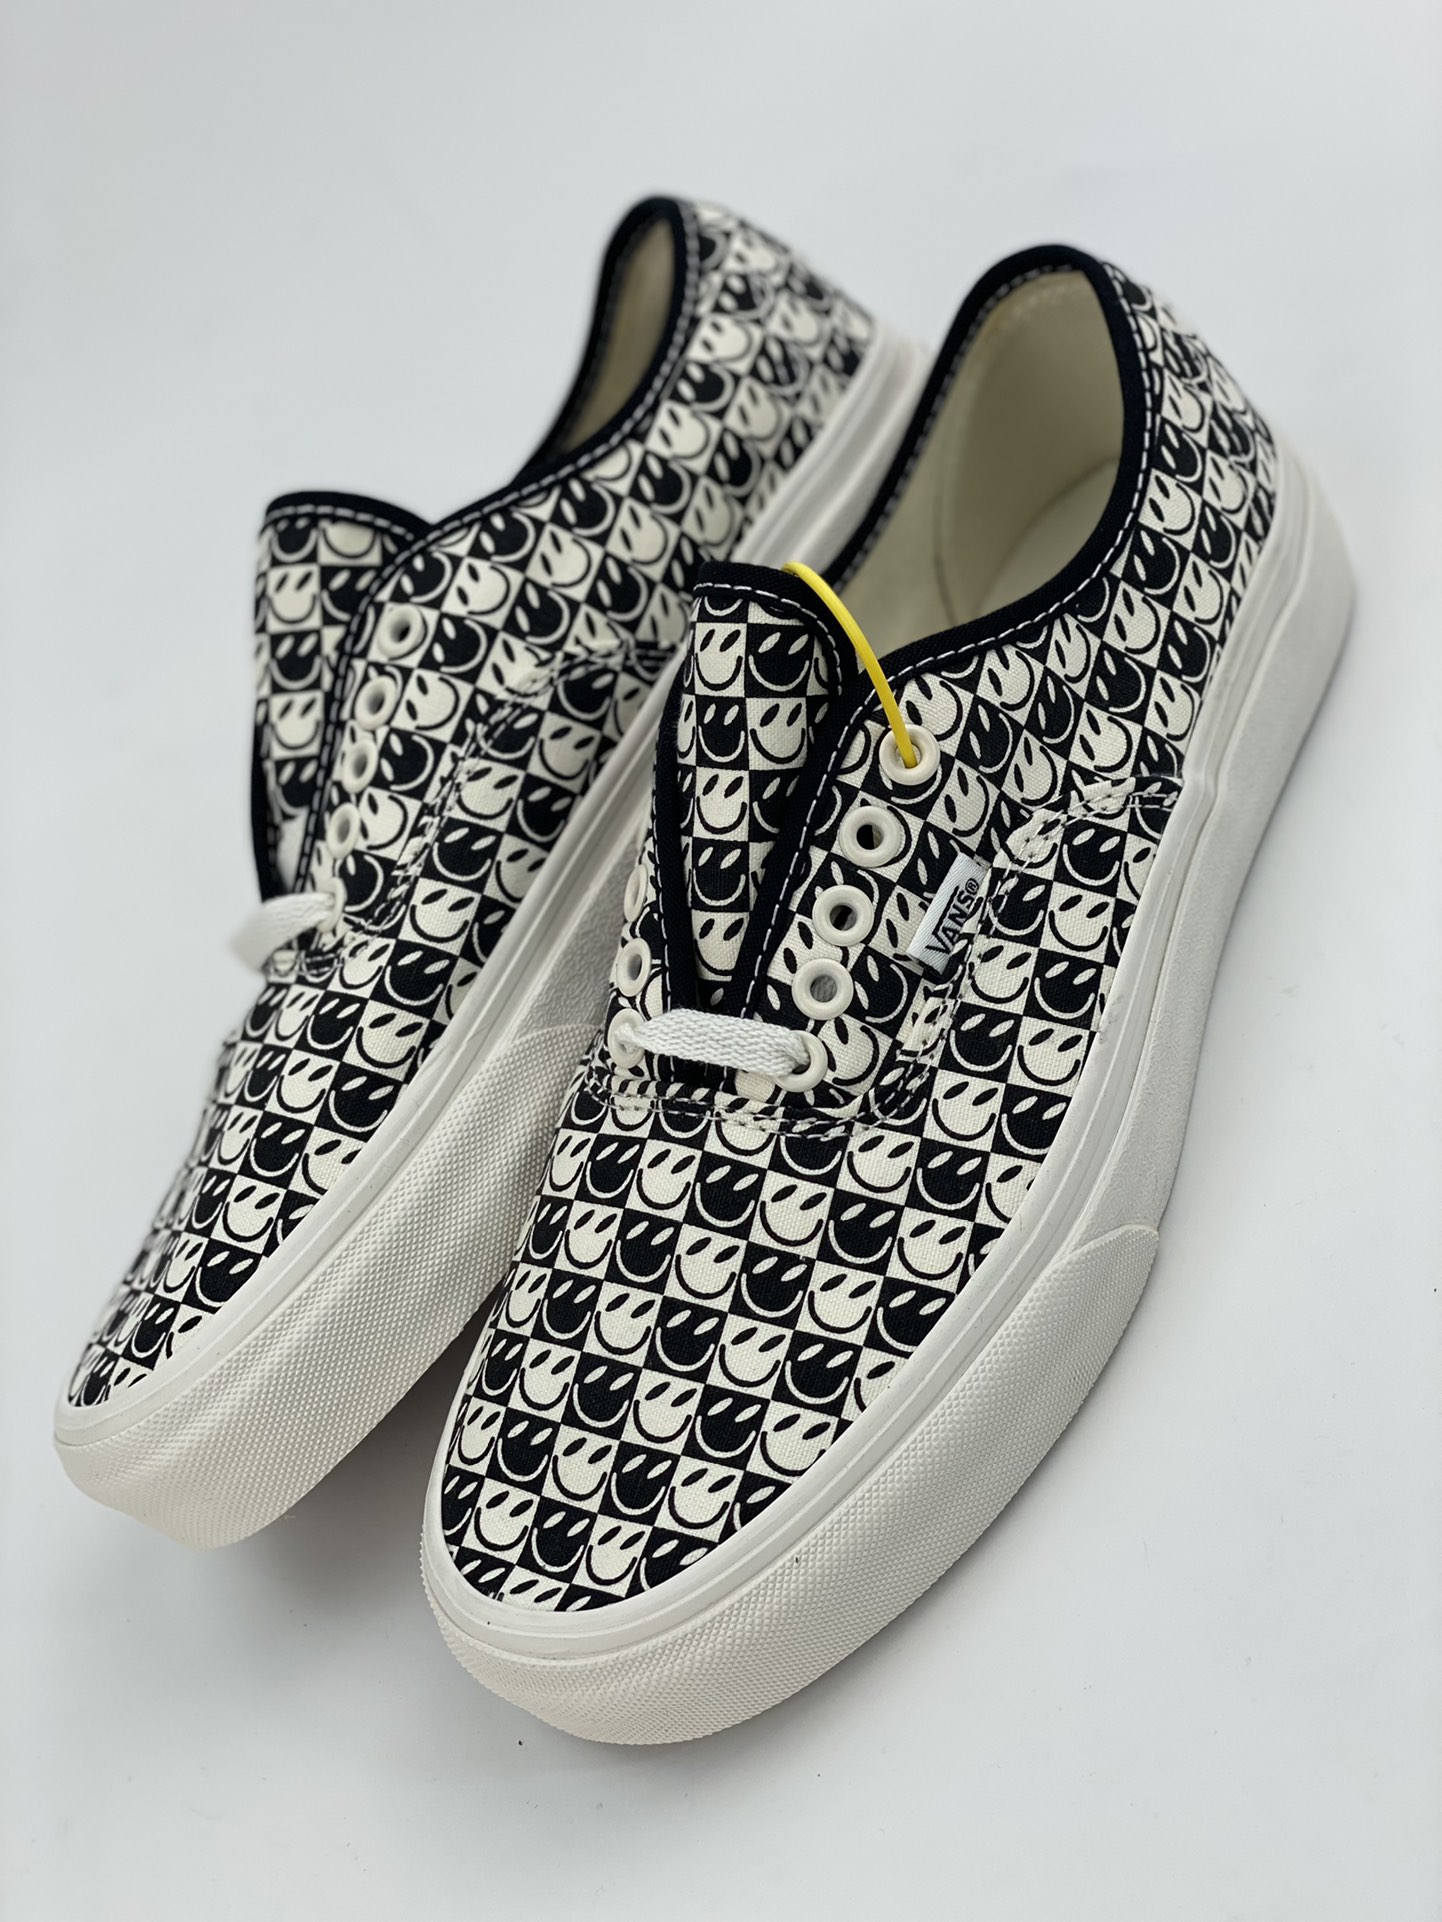 Vans official Authentic VR3 smiley checkerboard print men's and women's canvas shoes VN000BVWKIG